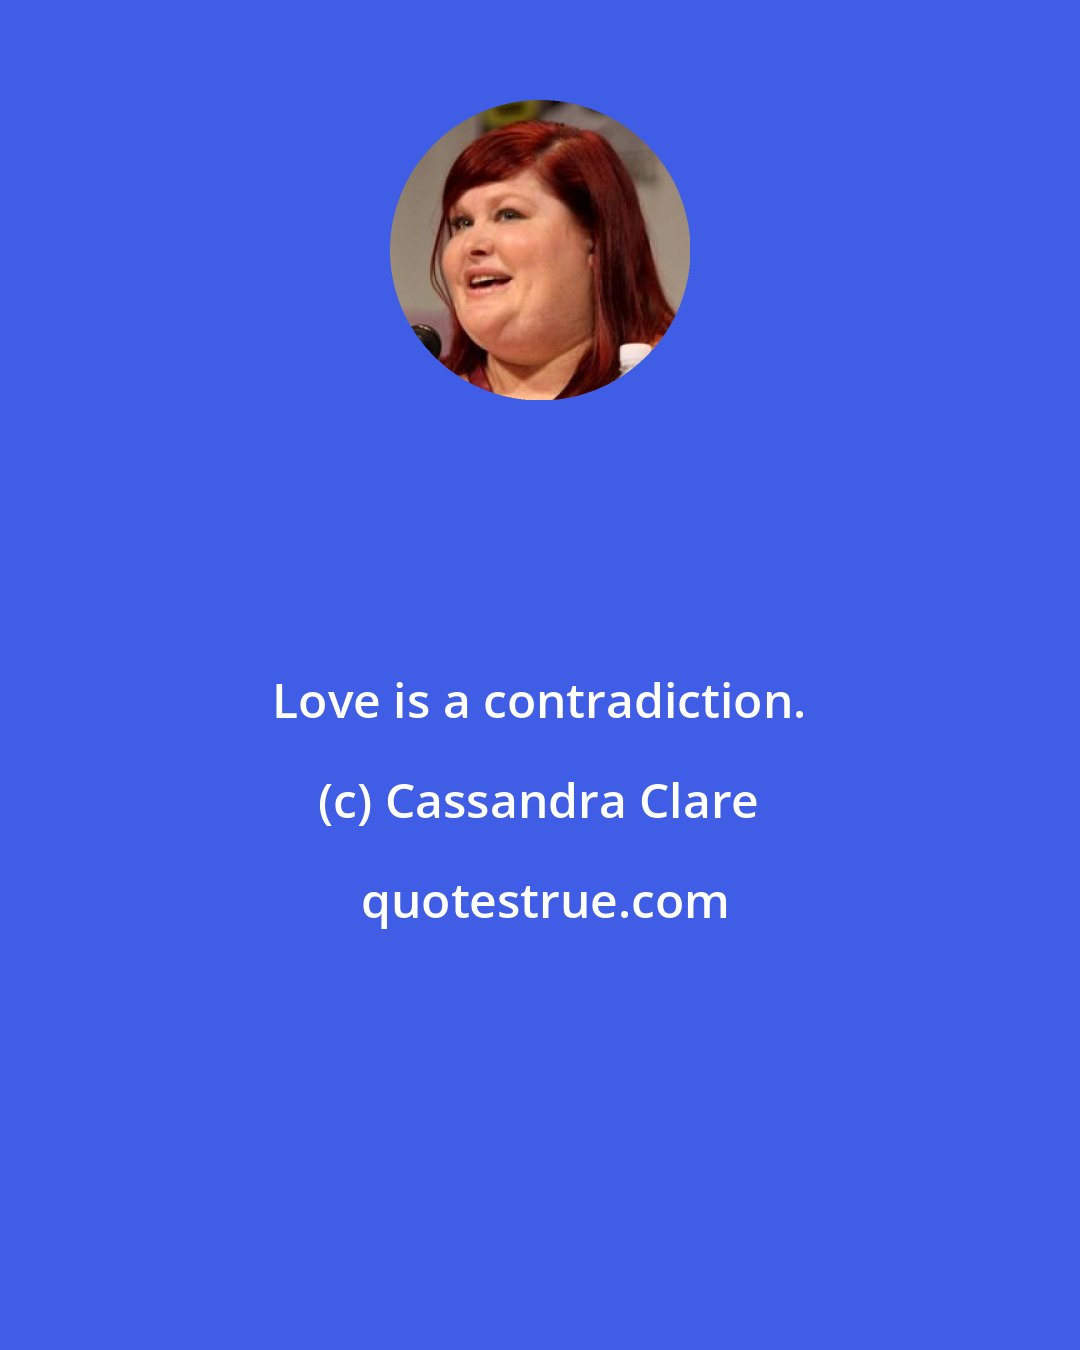 Cassandra Clare: Love is a contradiction.